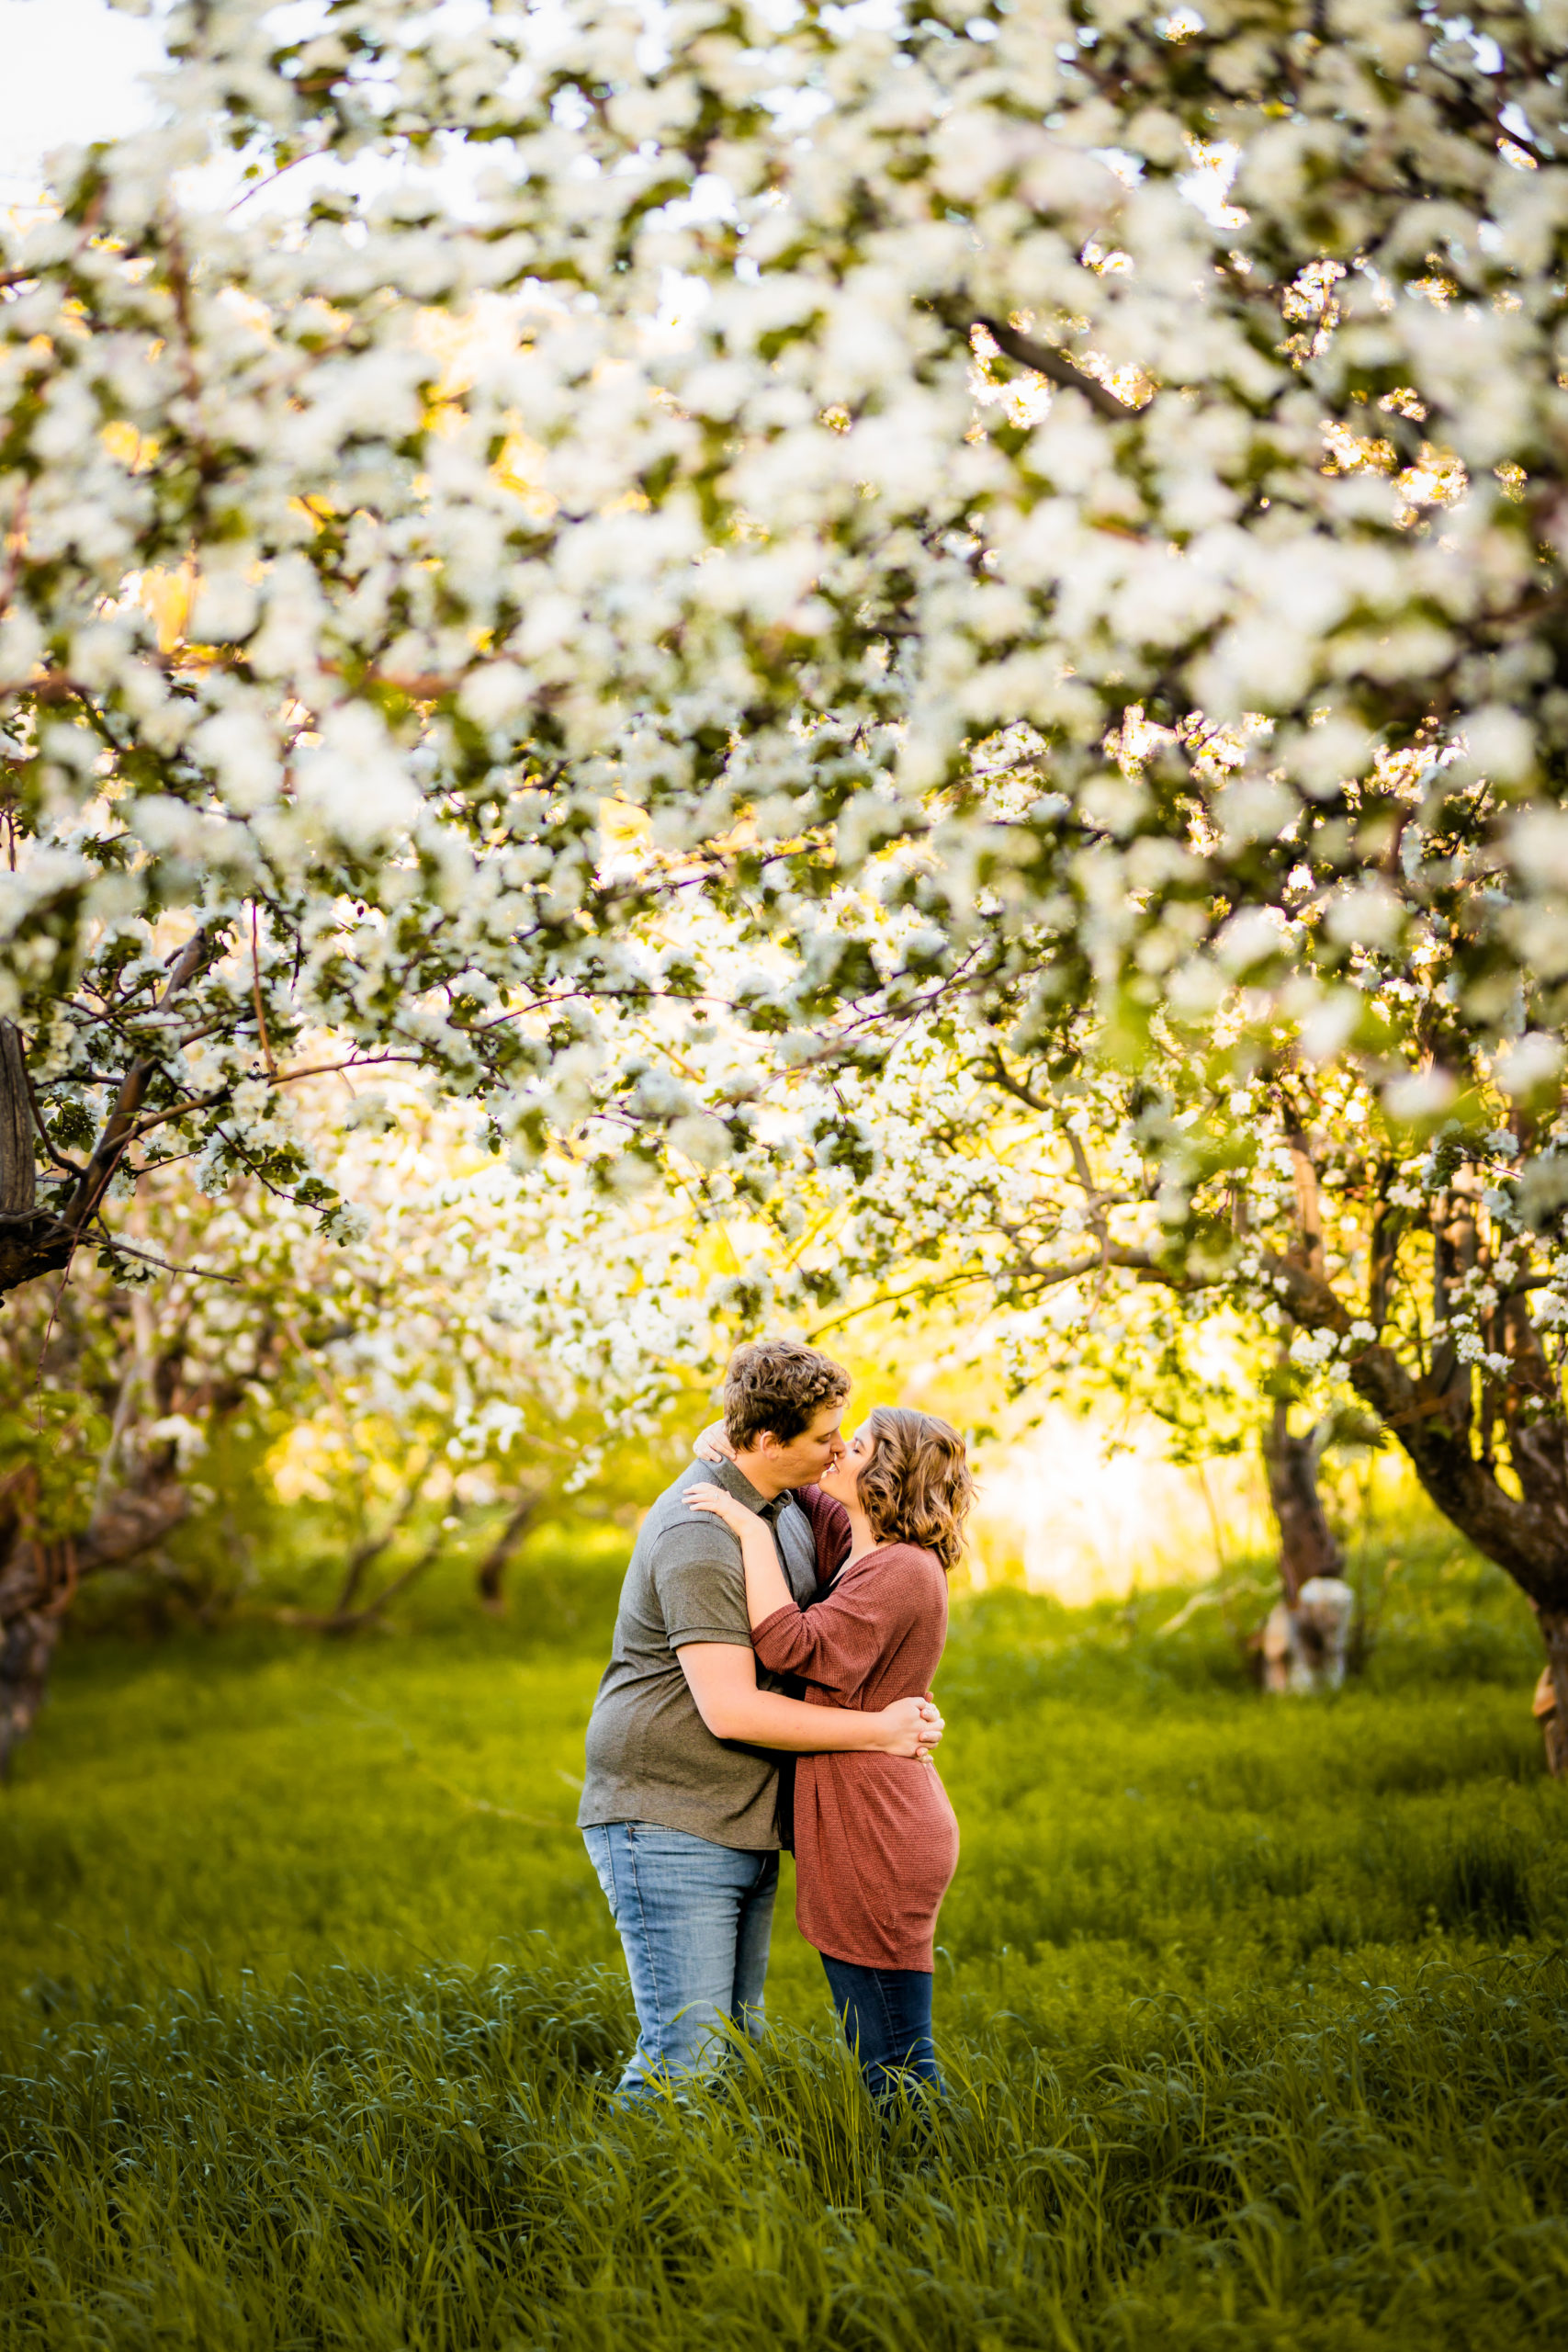 man and woman embracing and kissing in apple blossoms